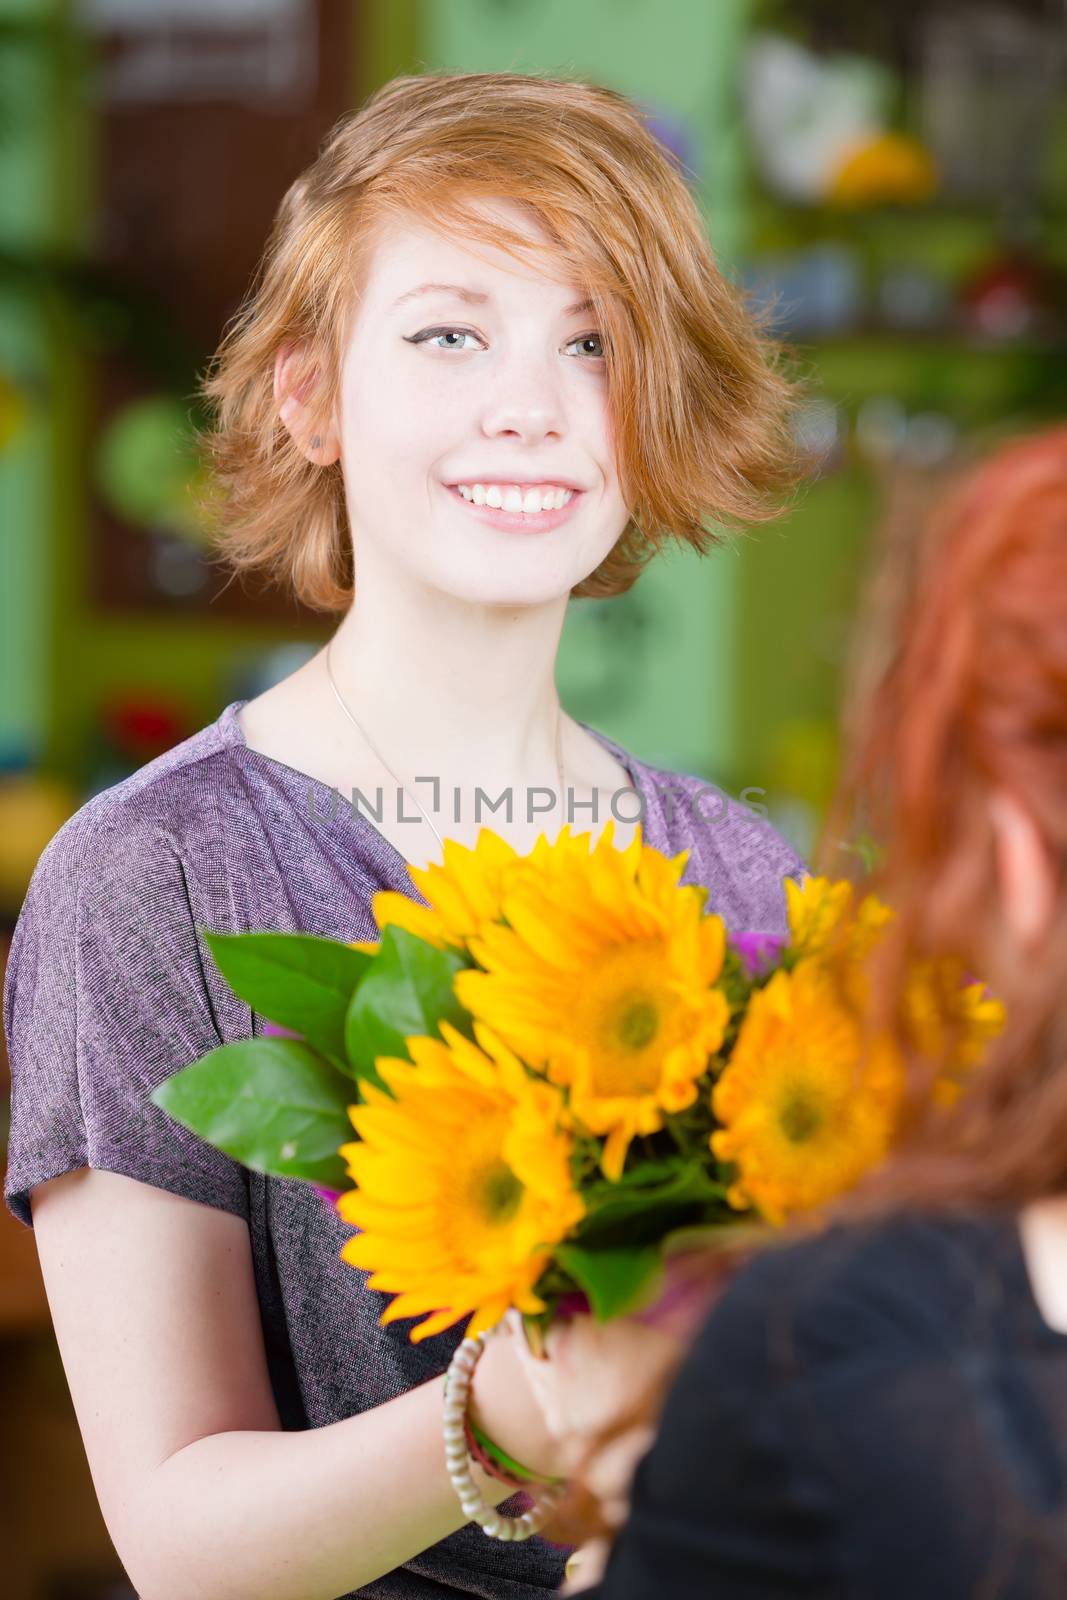 Teenage girl buying sunflowers at a florist shop